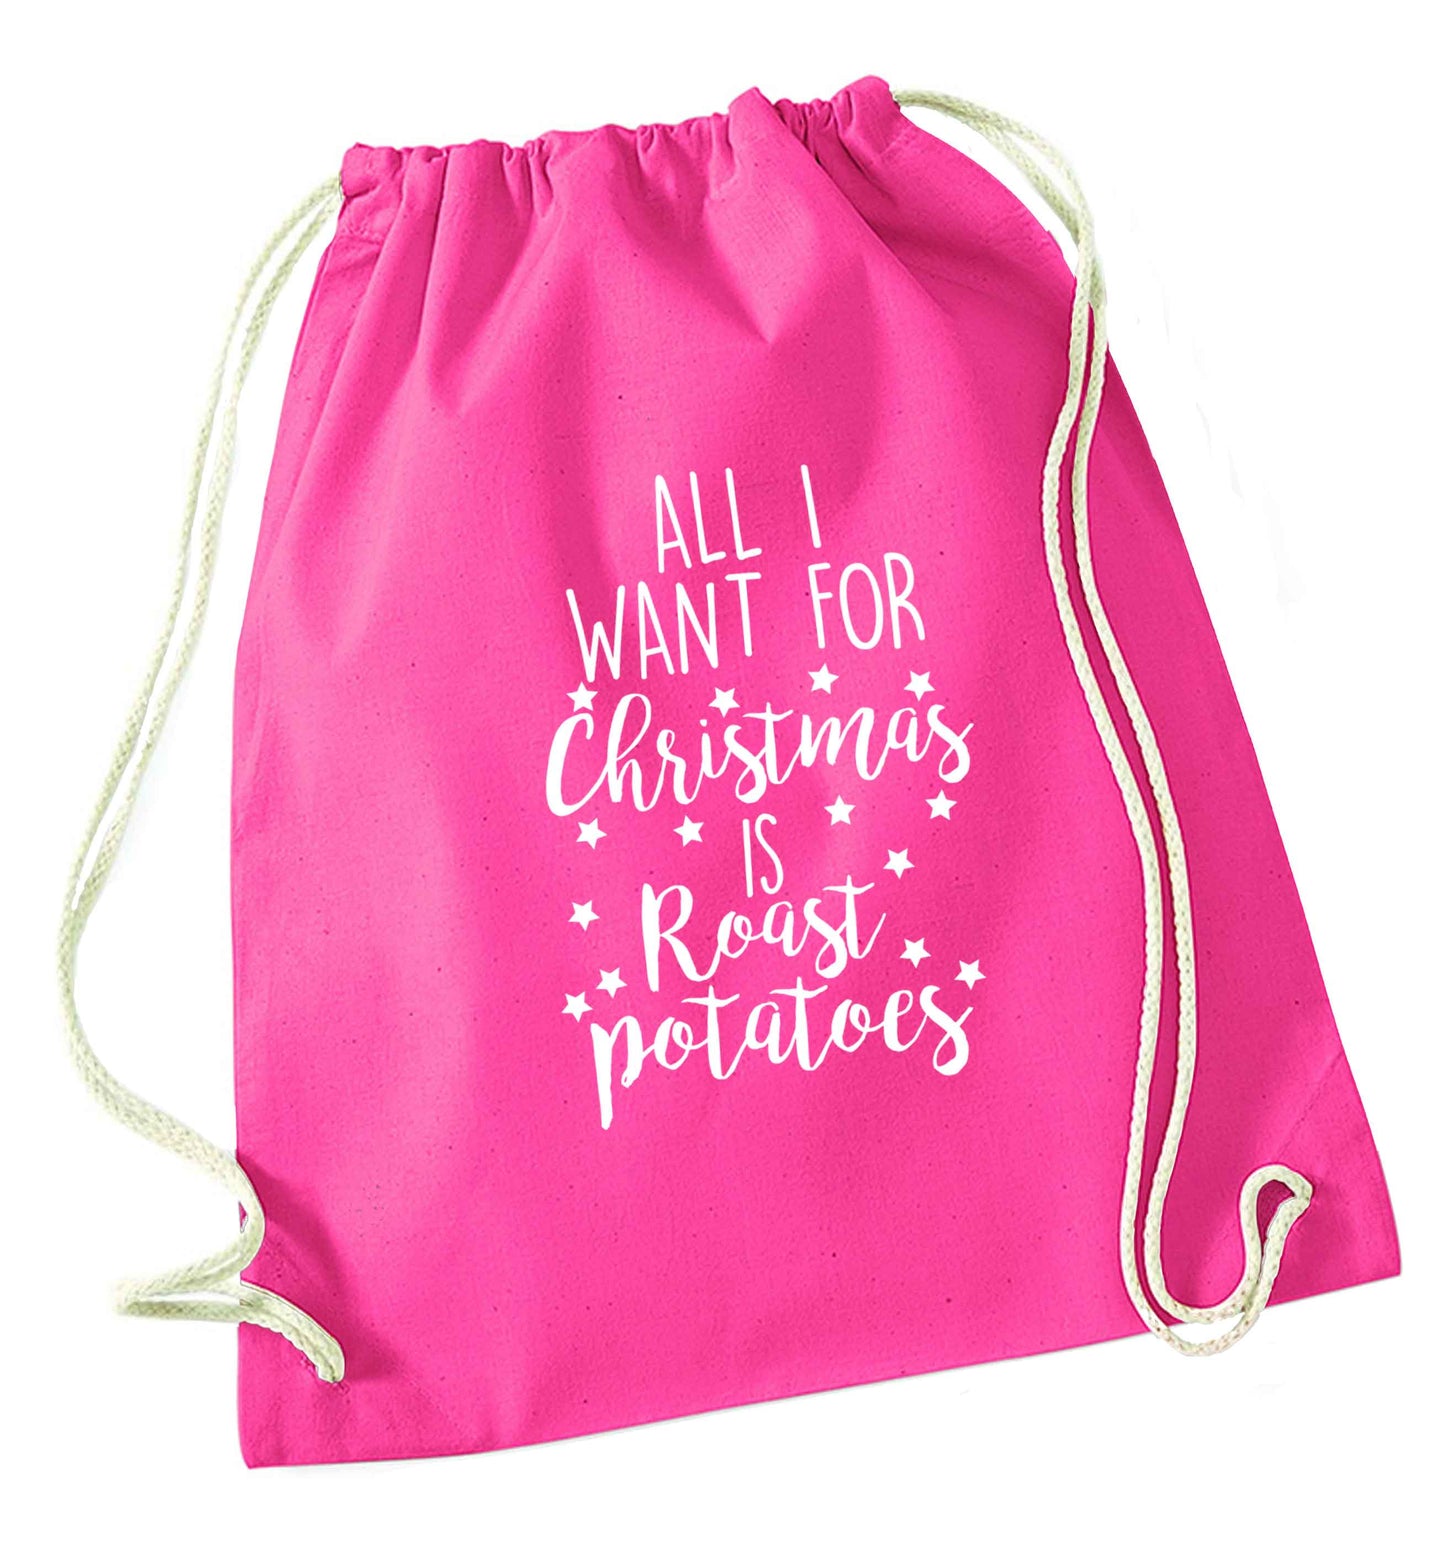 All I want for Christmas is roast potatoes pink drawstring bag